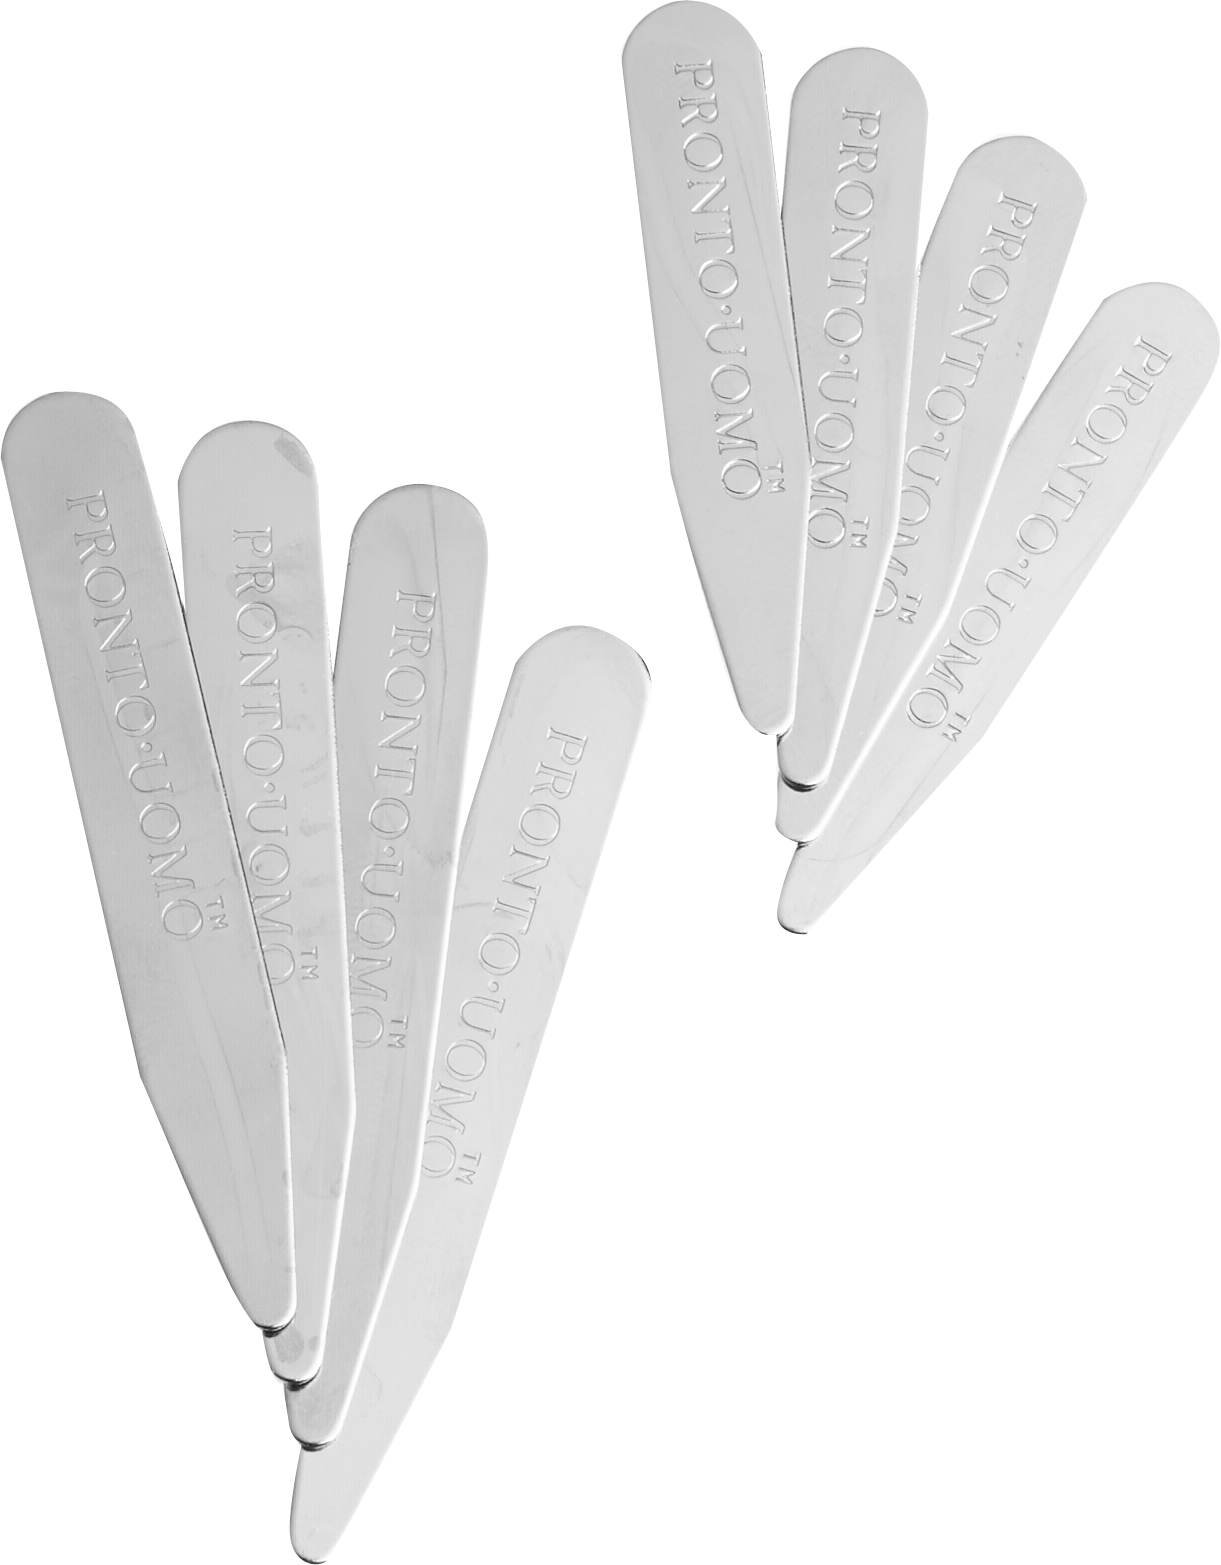 Stainless Steel Collar Stays 8-pack